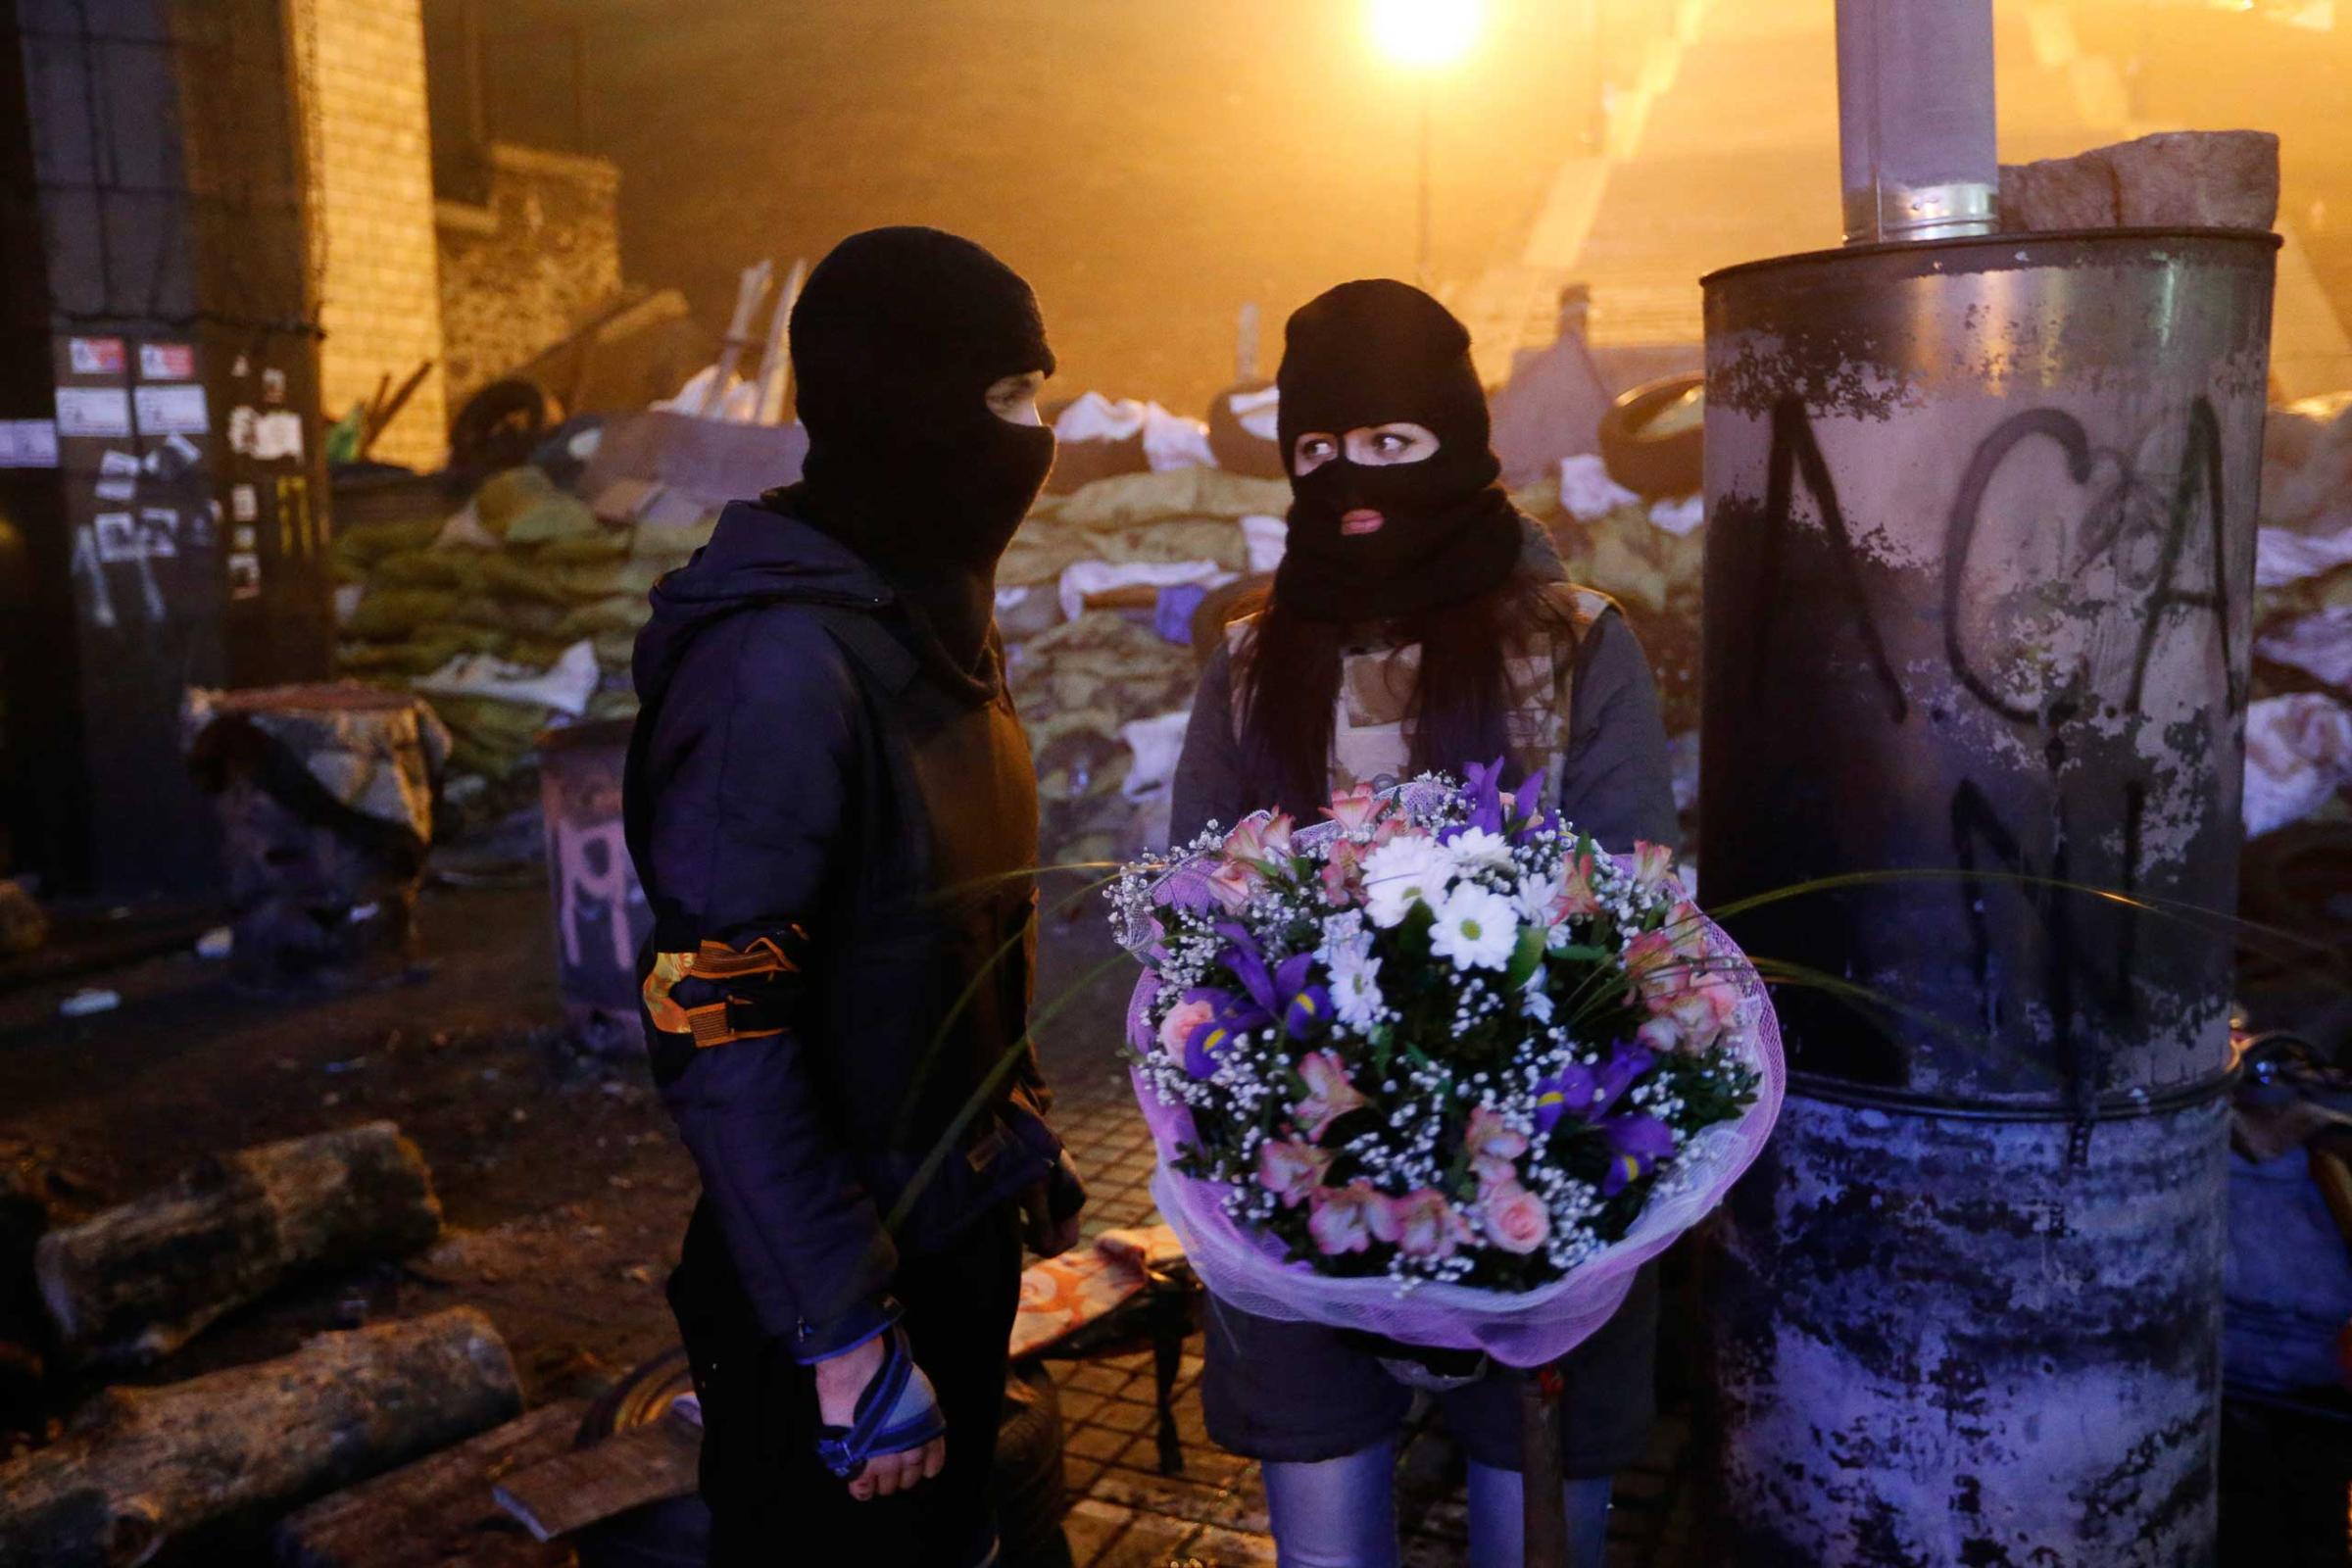 An activist from the "Right Sector" anti-government protest group presents flowers to his girlfriend in front of fellow activists near the site of previous clashes with riot police in Kiev